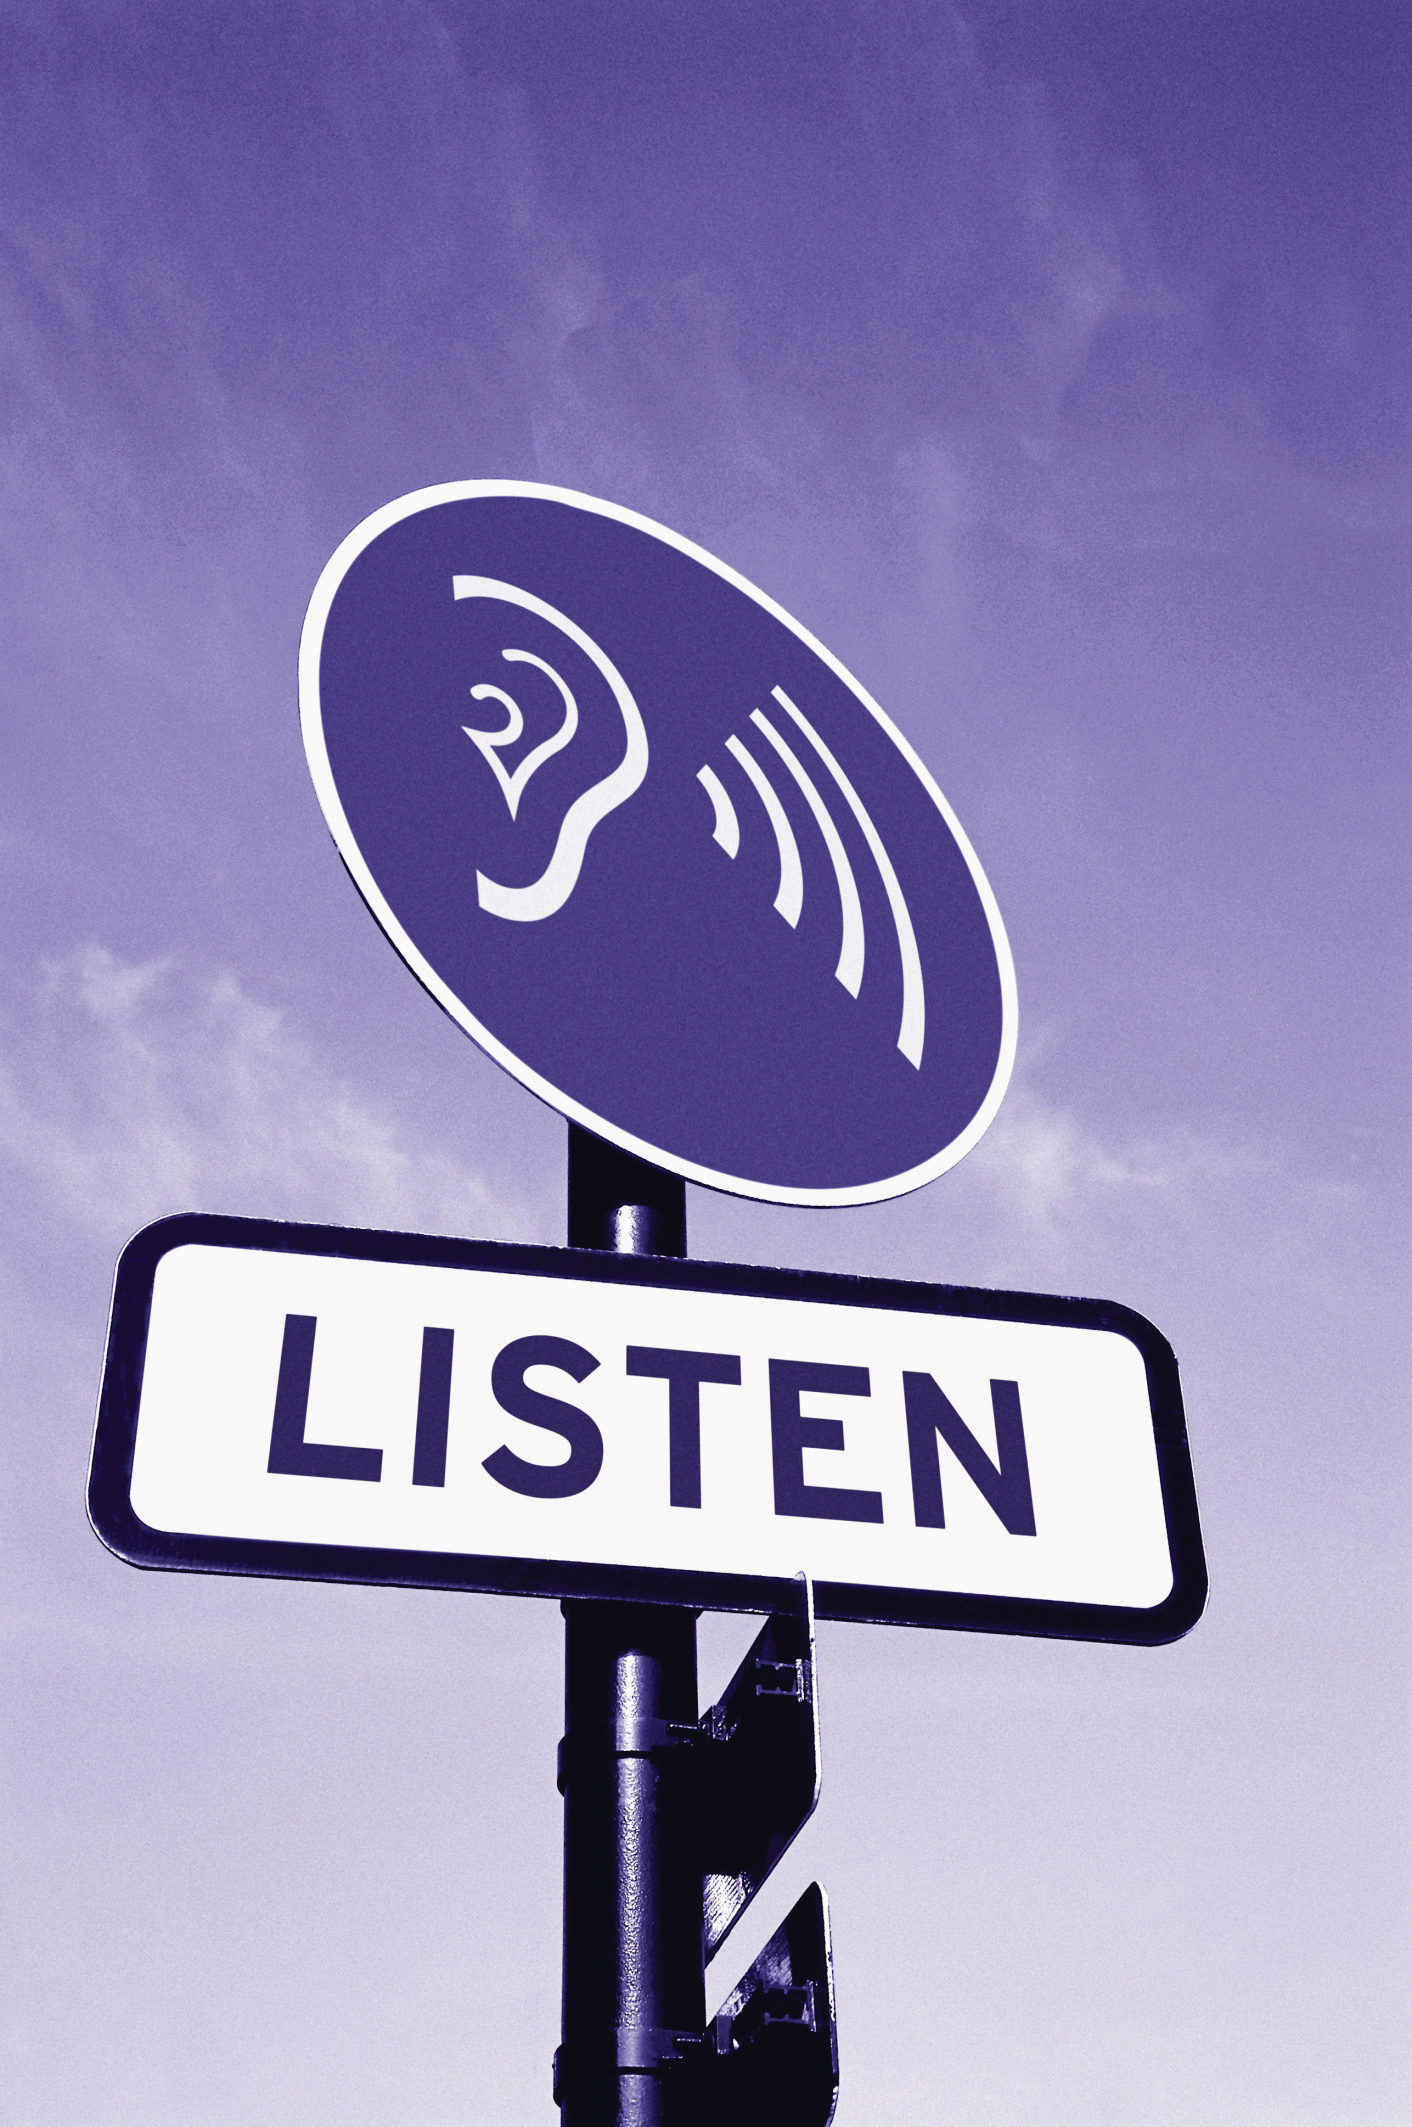 Decorative image with the word, "Listen"